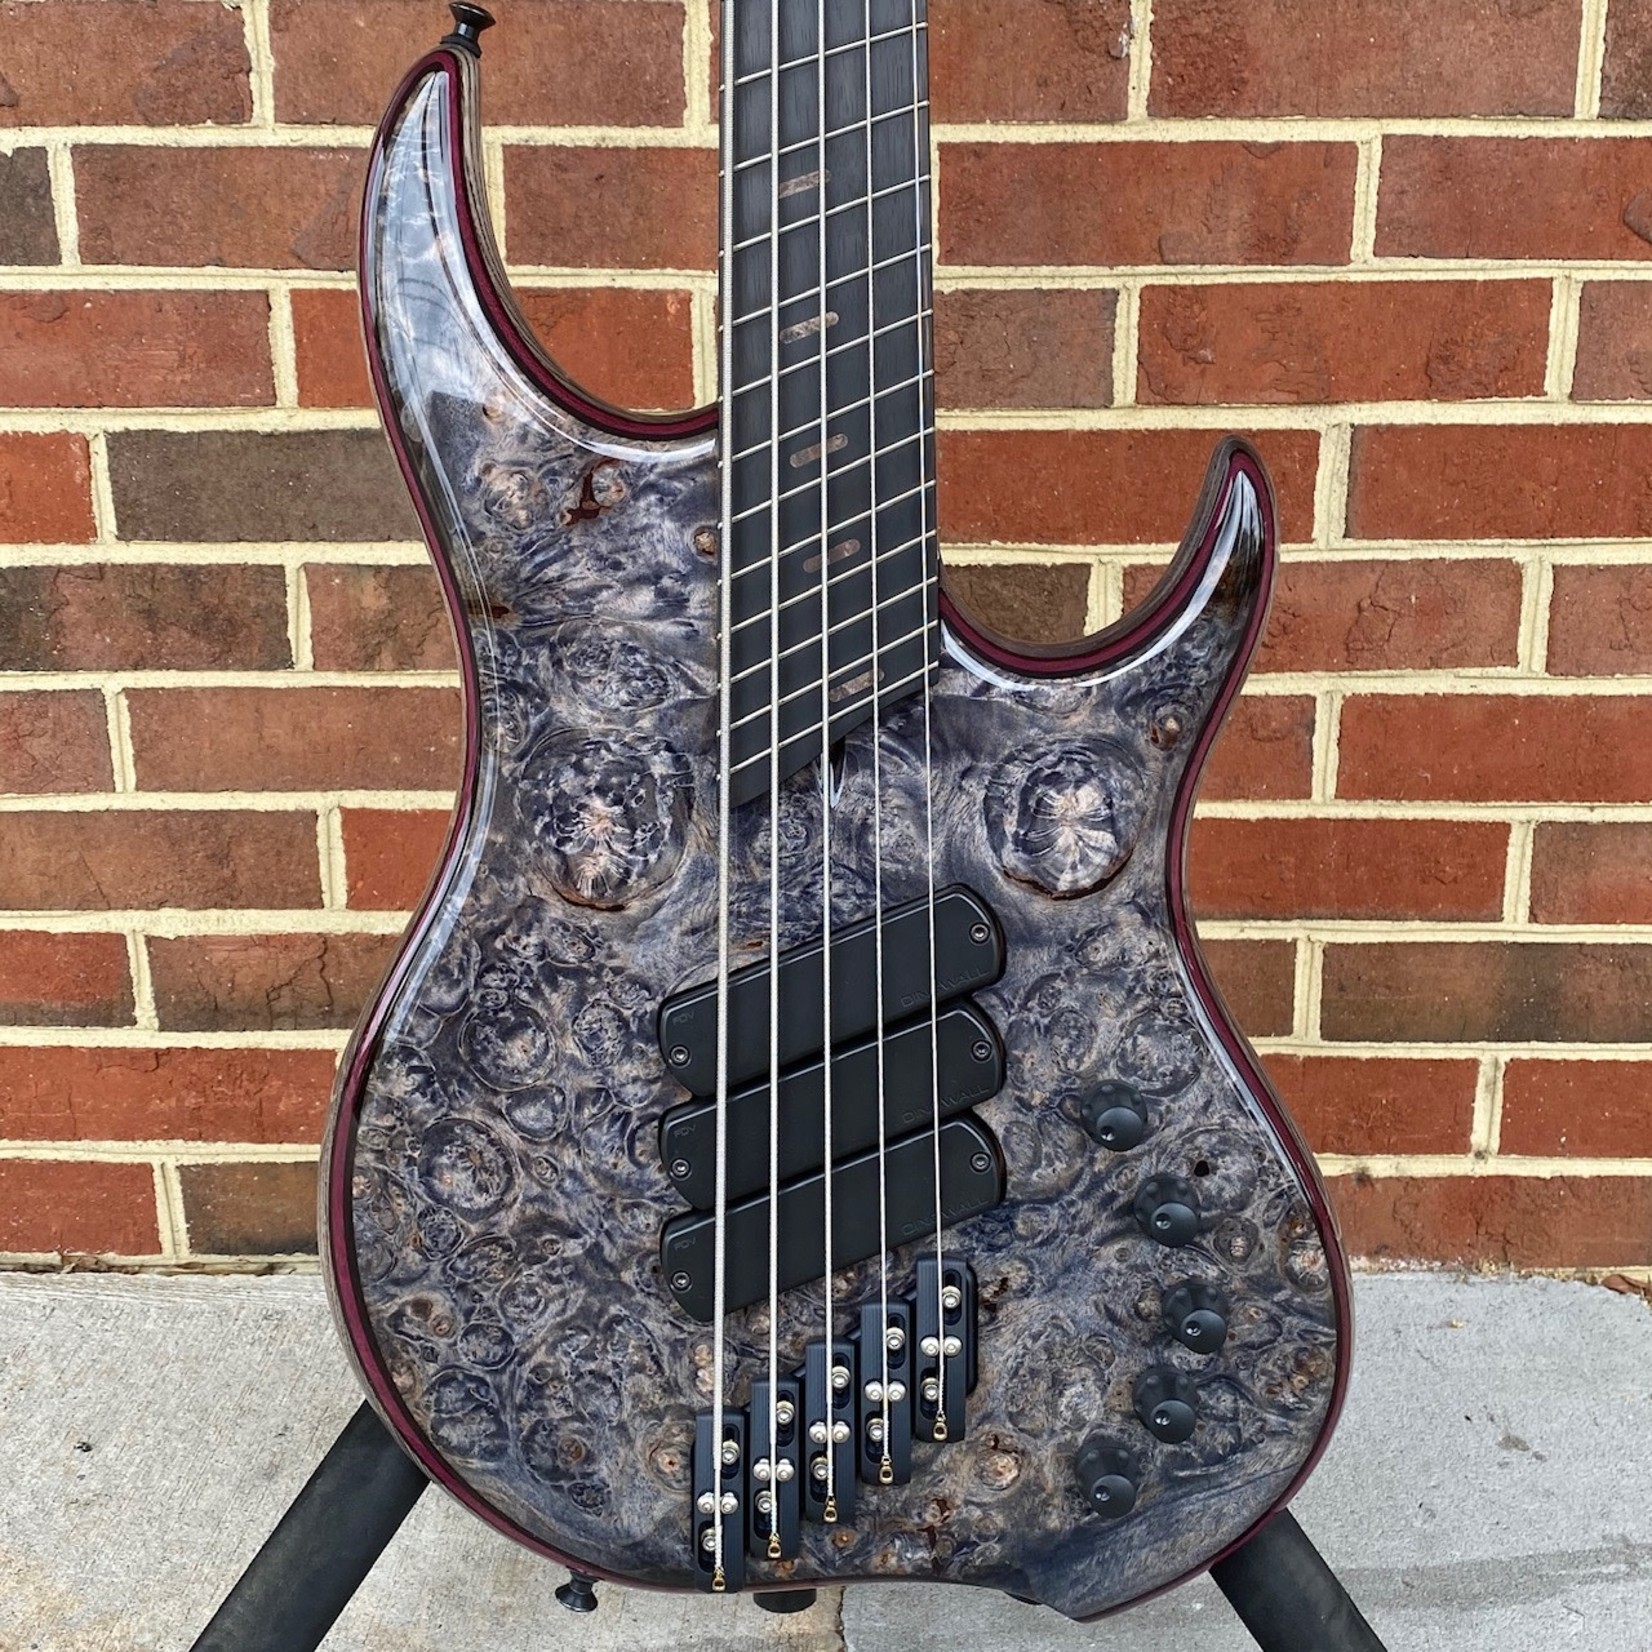 Dingwall Dingwall Custom Z3, 5-String, Dual-Density Swamp Ash Body, Burled Maple Top (#1530), Wenge/Purple Heart/Wenge Contrast Layer, Pre Bleached Trans Black Finish, Darkglass 3-band preamp, Wenge Neck with Ebony Fretboard, Matching Wood Speedo Bars